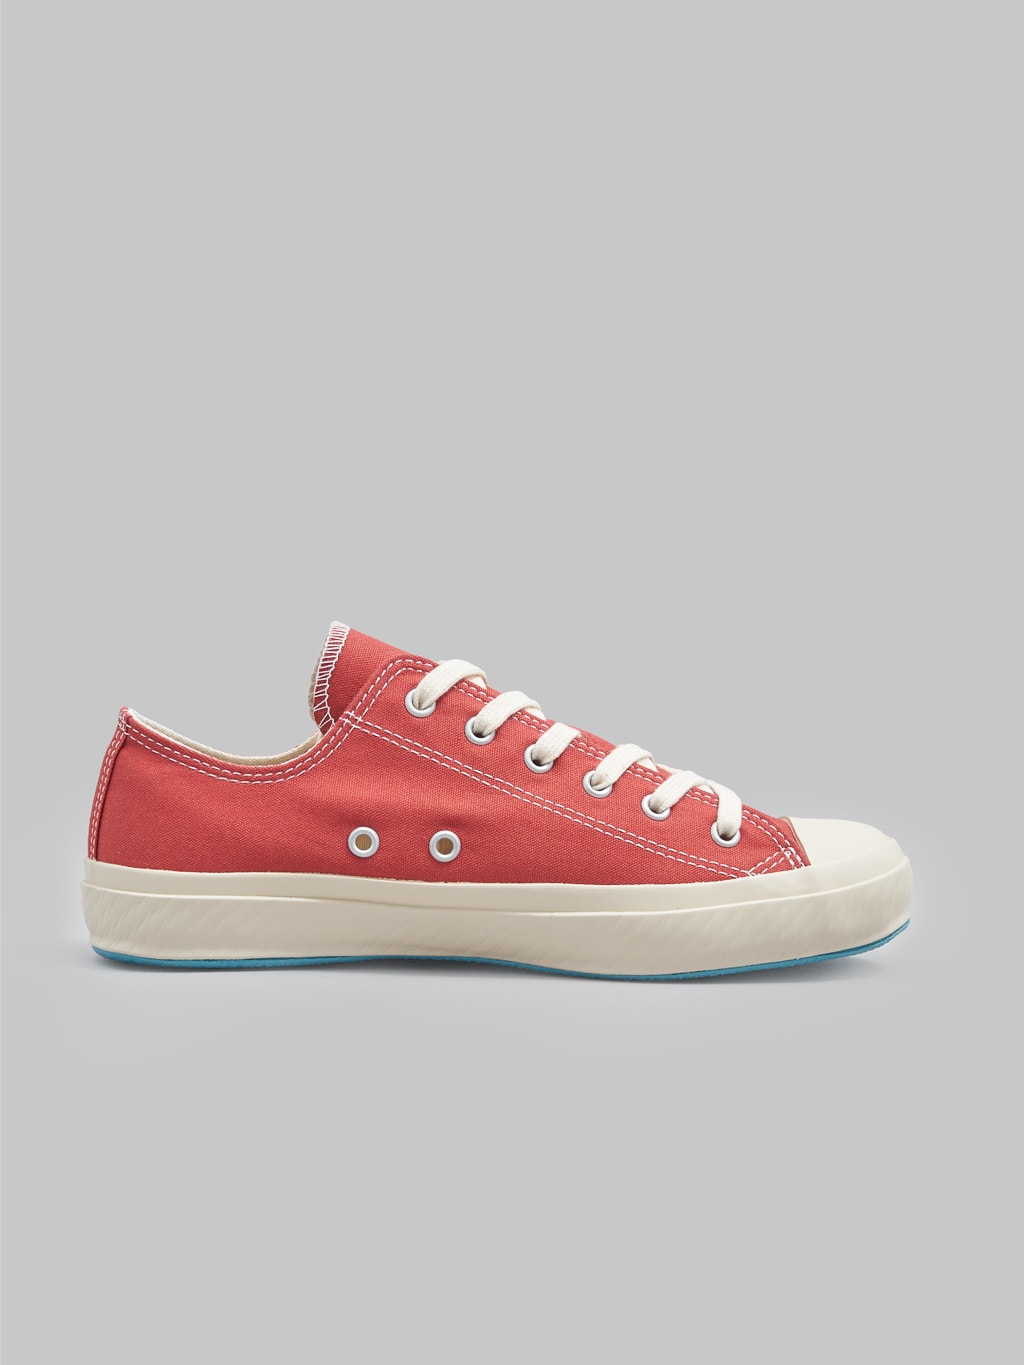 Shoes Like Pottery 01JP Low Sneaker Red